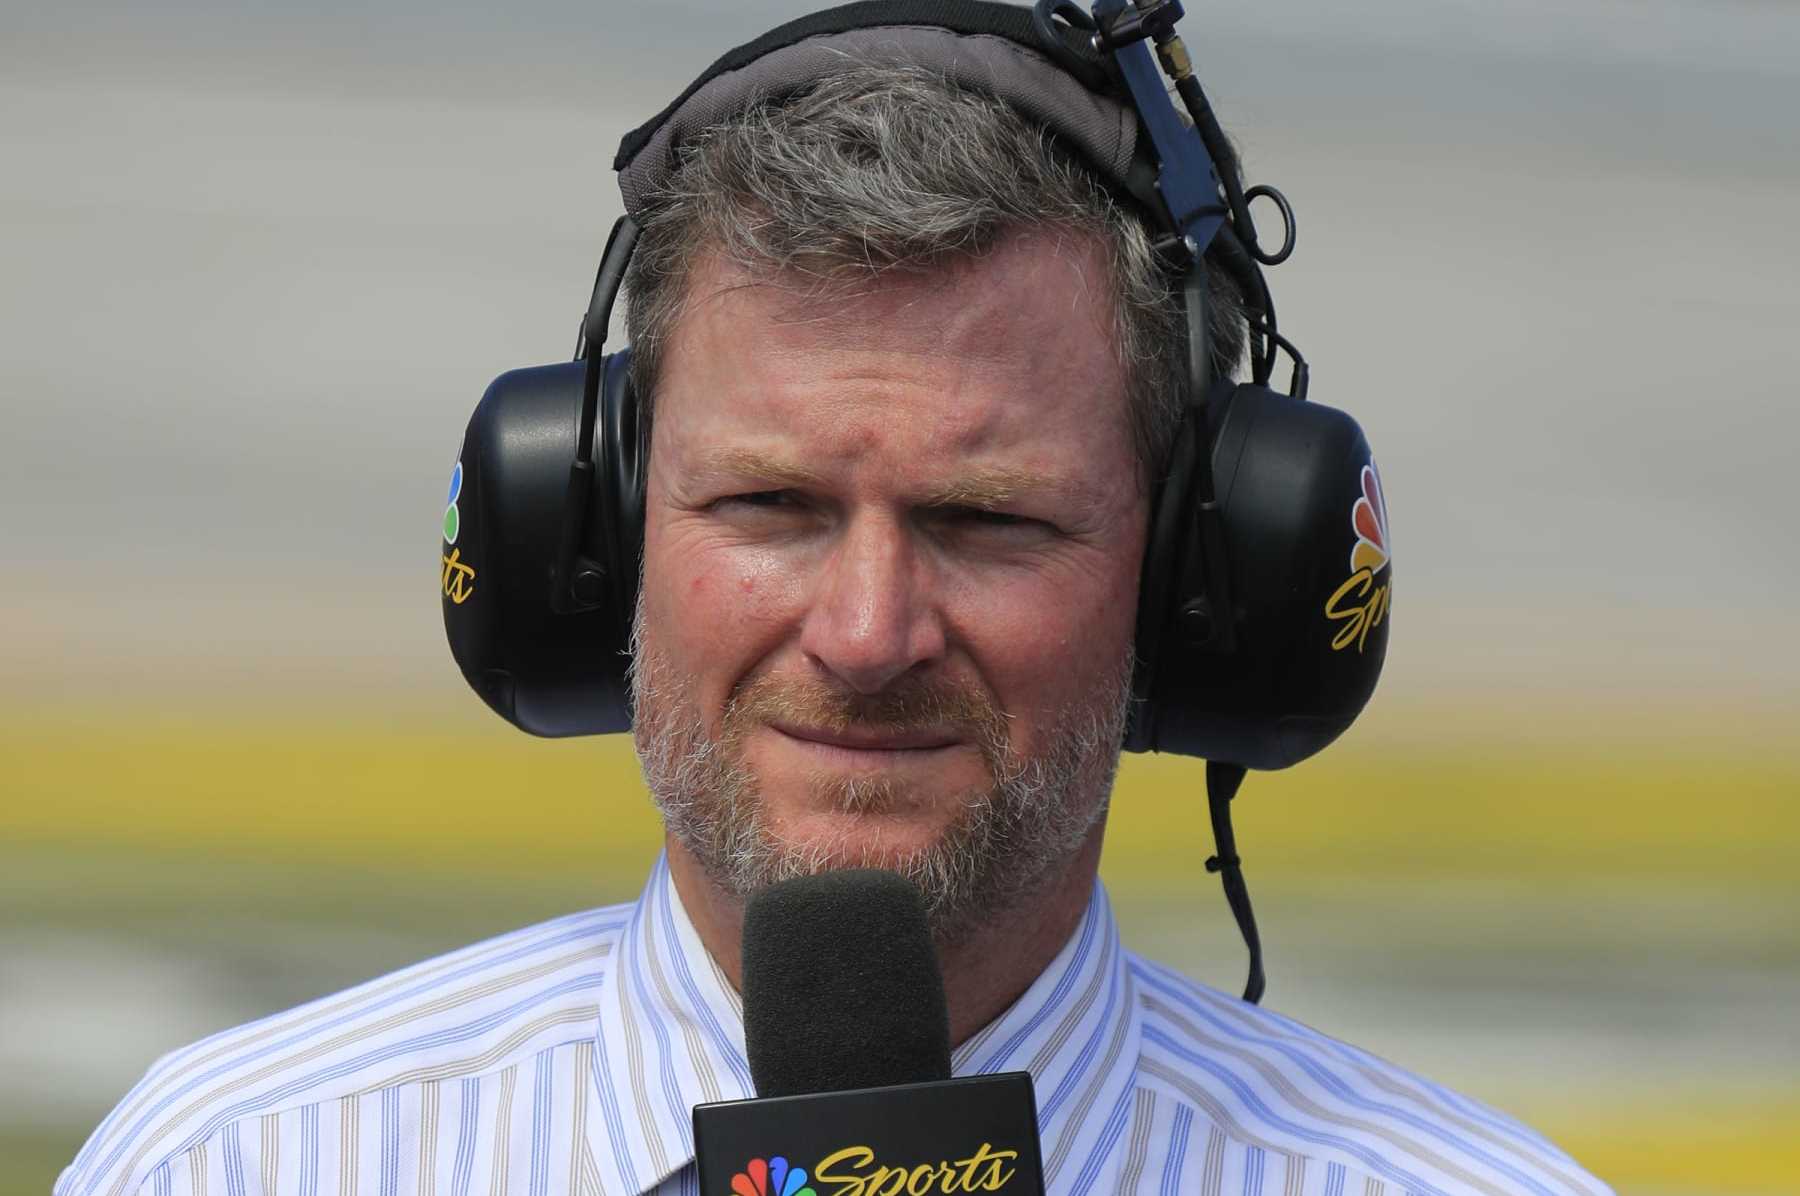 Starting in 2025, Dale Earnhardt Jr. will be a NASCAR broadcaster for TNT Sports.